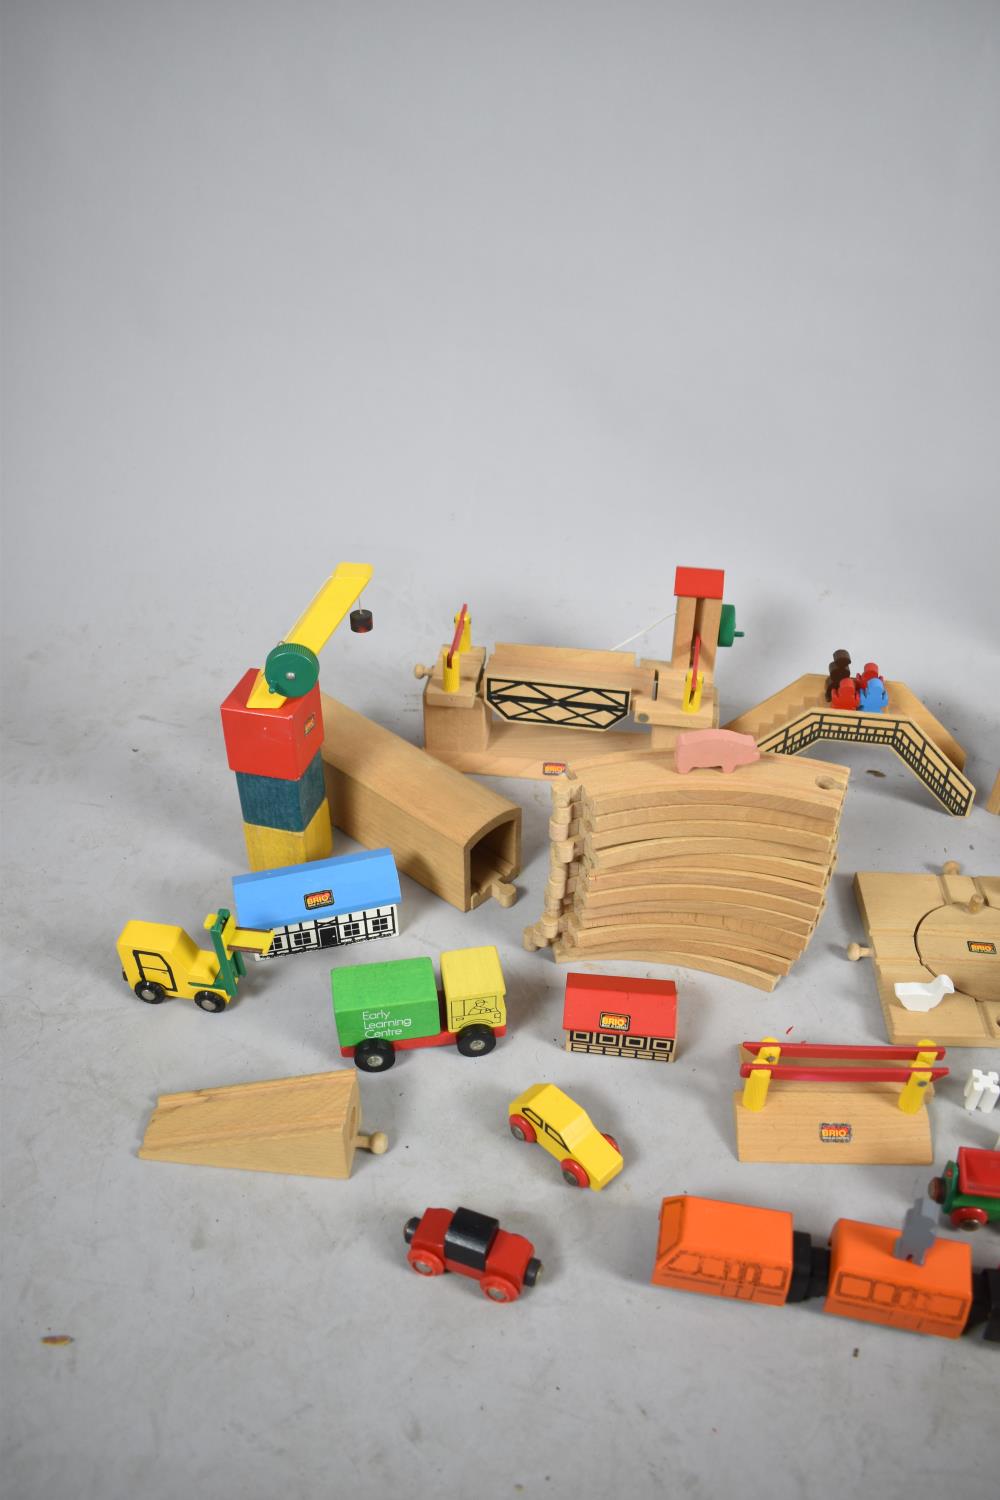 A Collection of Swedish Brio Wooden Railway Track, Carriages and Accessories - Image 2 of 4